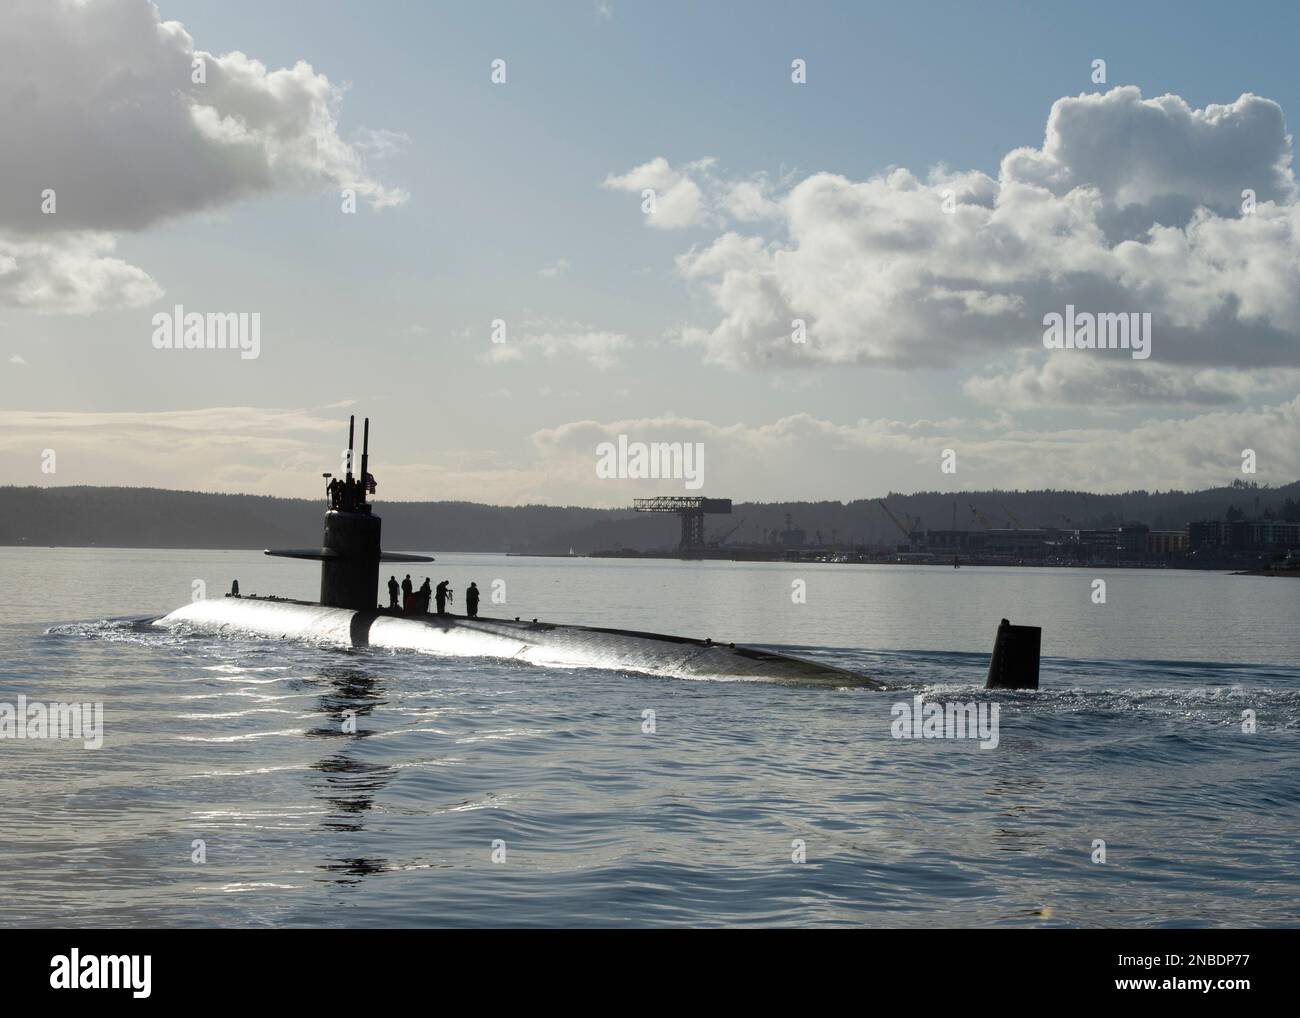 230210-N-ED185-1261  PUGET SOUND, Wash. (Feb. 10, 2023) The Los Angeles-class fast-attack submarine USS Key West (SSN 722) transits the Puget Sound before mooring at Naval Base Kitsap – Bremerton, Washington, February 10, 2023. Measuring more than 360 feet long and weighing more than 6,900 tons when submerged, Key West supports a multitude of missions to include anti-submarine warfare, anti-surface ship warfare, surveillance and reconnaissance, and strike warfare. (U.S. Navy Photo by Mass Communication Specialist 1st Class Brian. G. Reynolds) Stock Photo